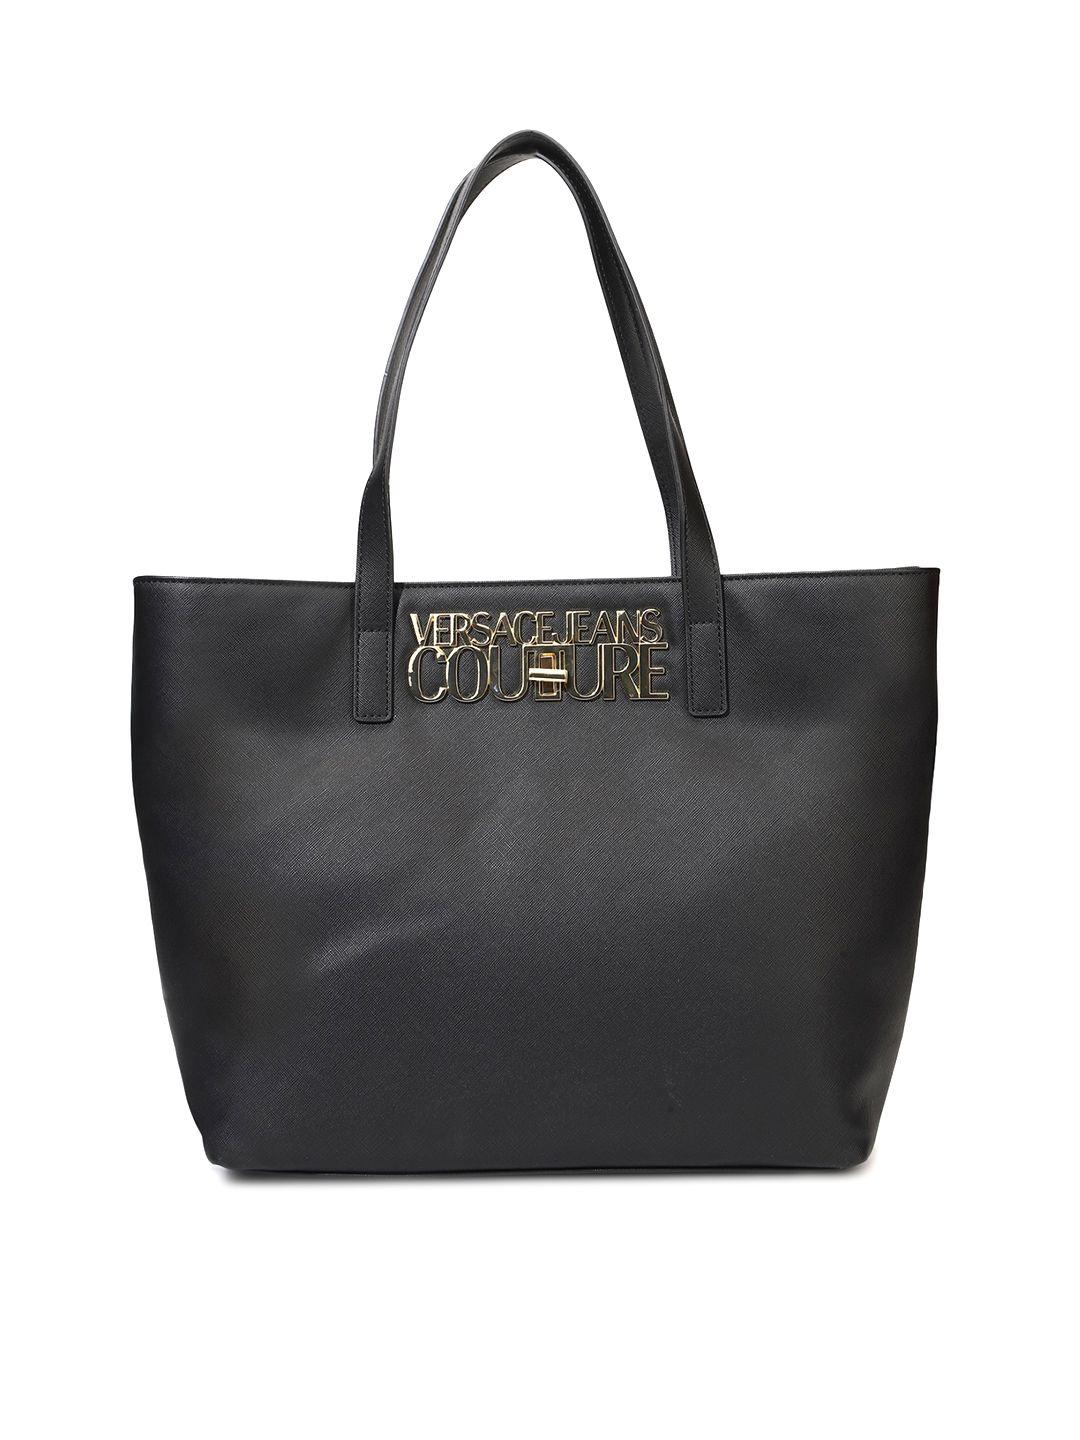 versace jeans couture shopper tote bag